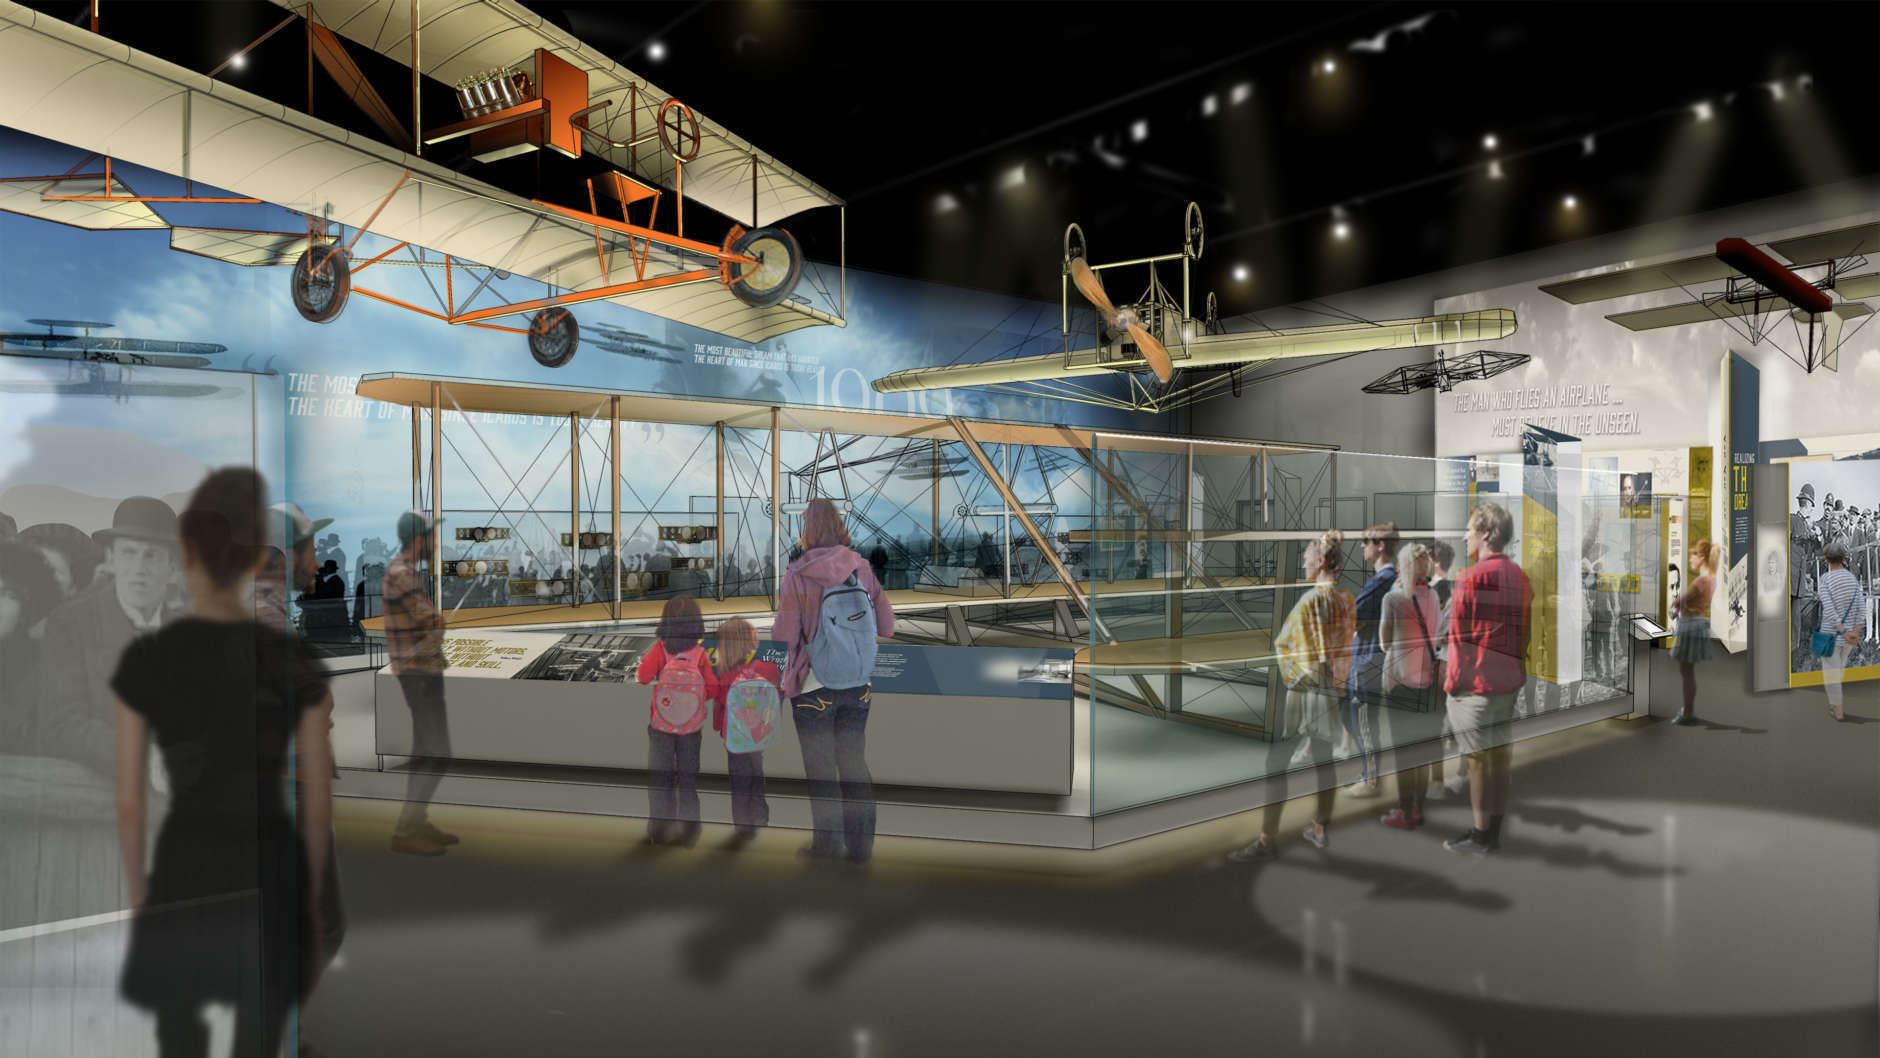 Visitors will see the "Early Flight" exhibit. (Copyright: Smithsonian Institution)